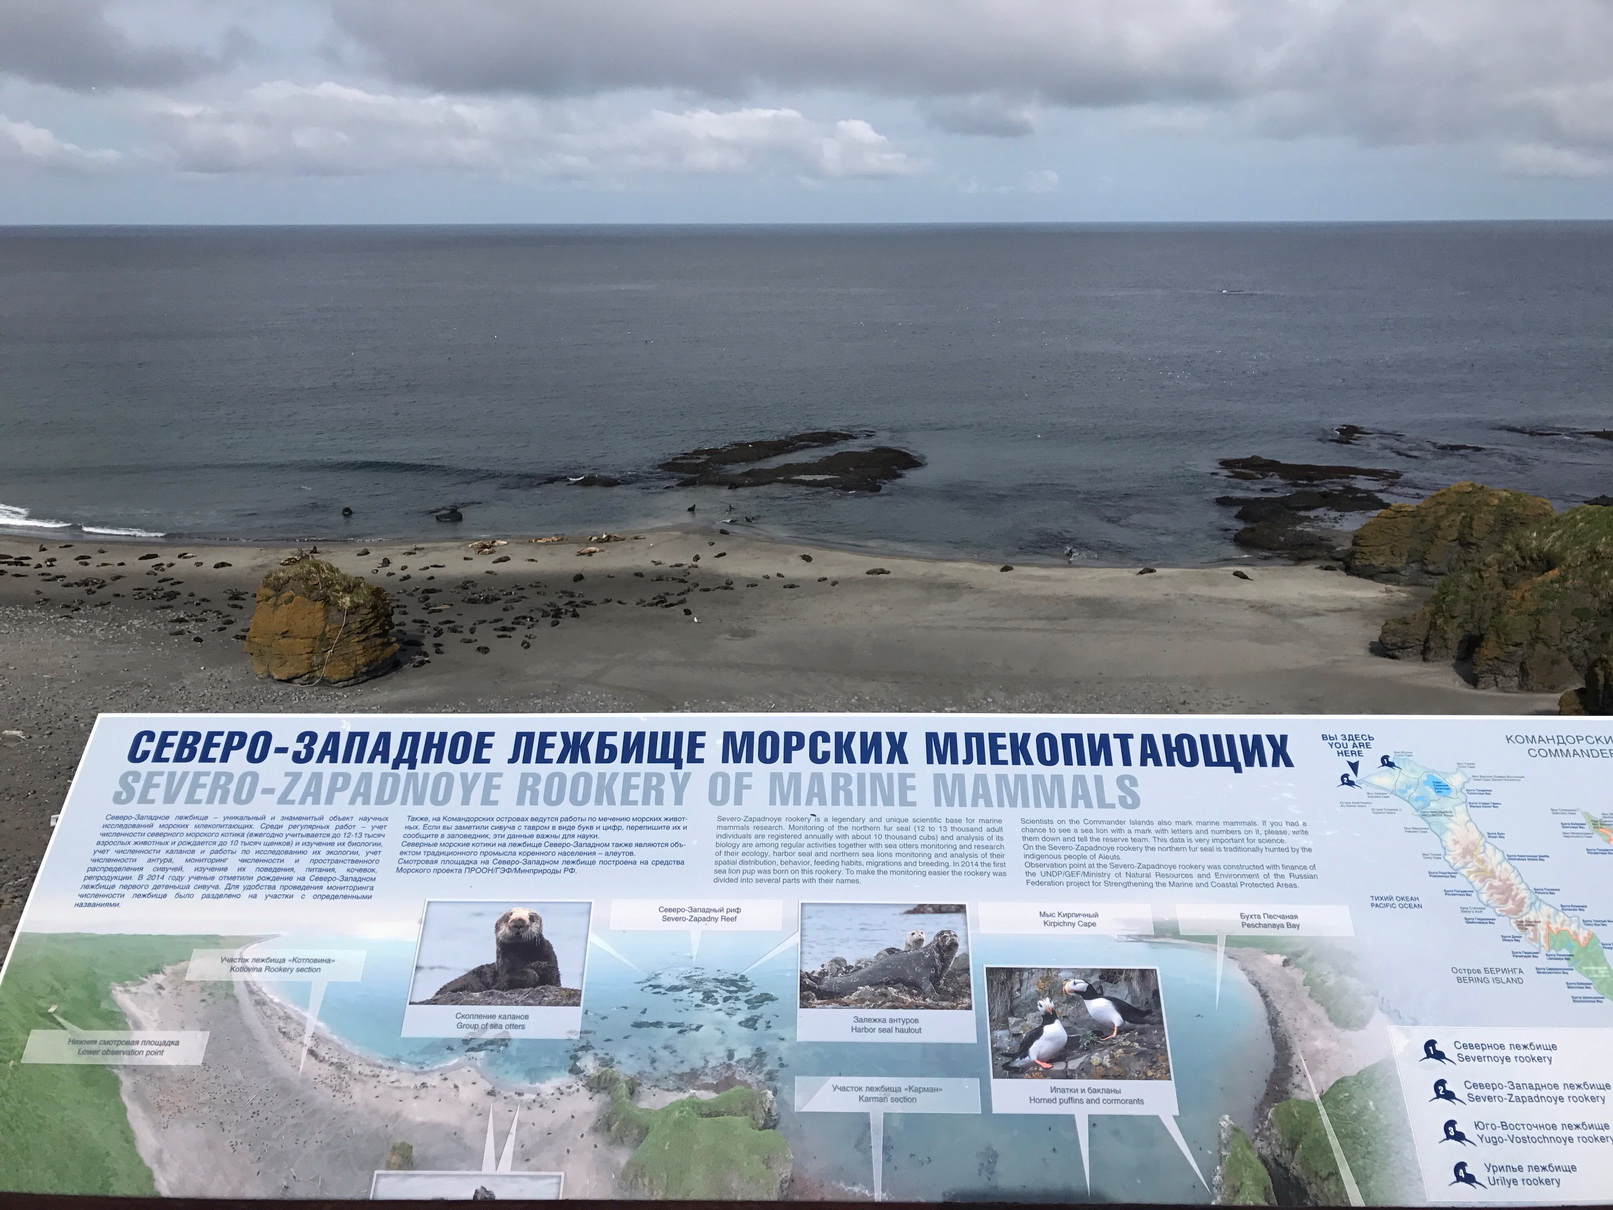 Information boards and view on the rookery. Photo by Evgeny Mamaev